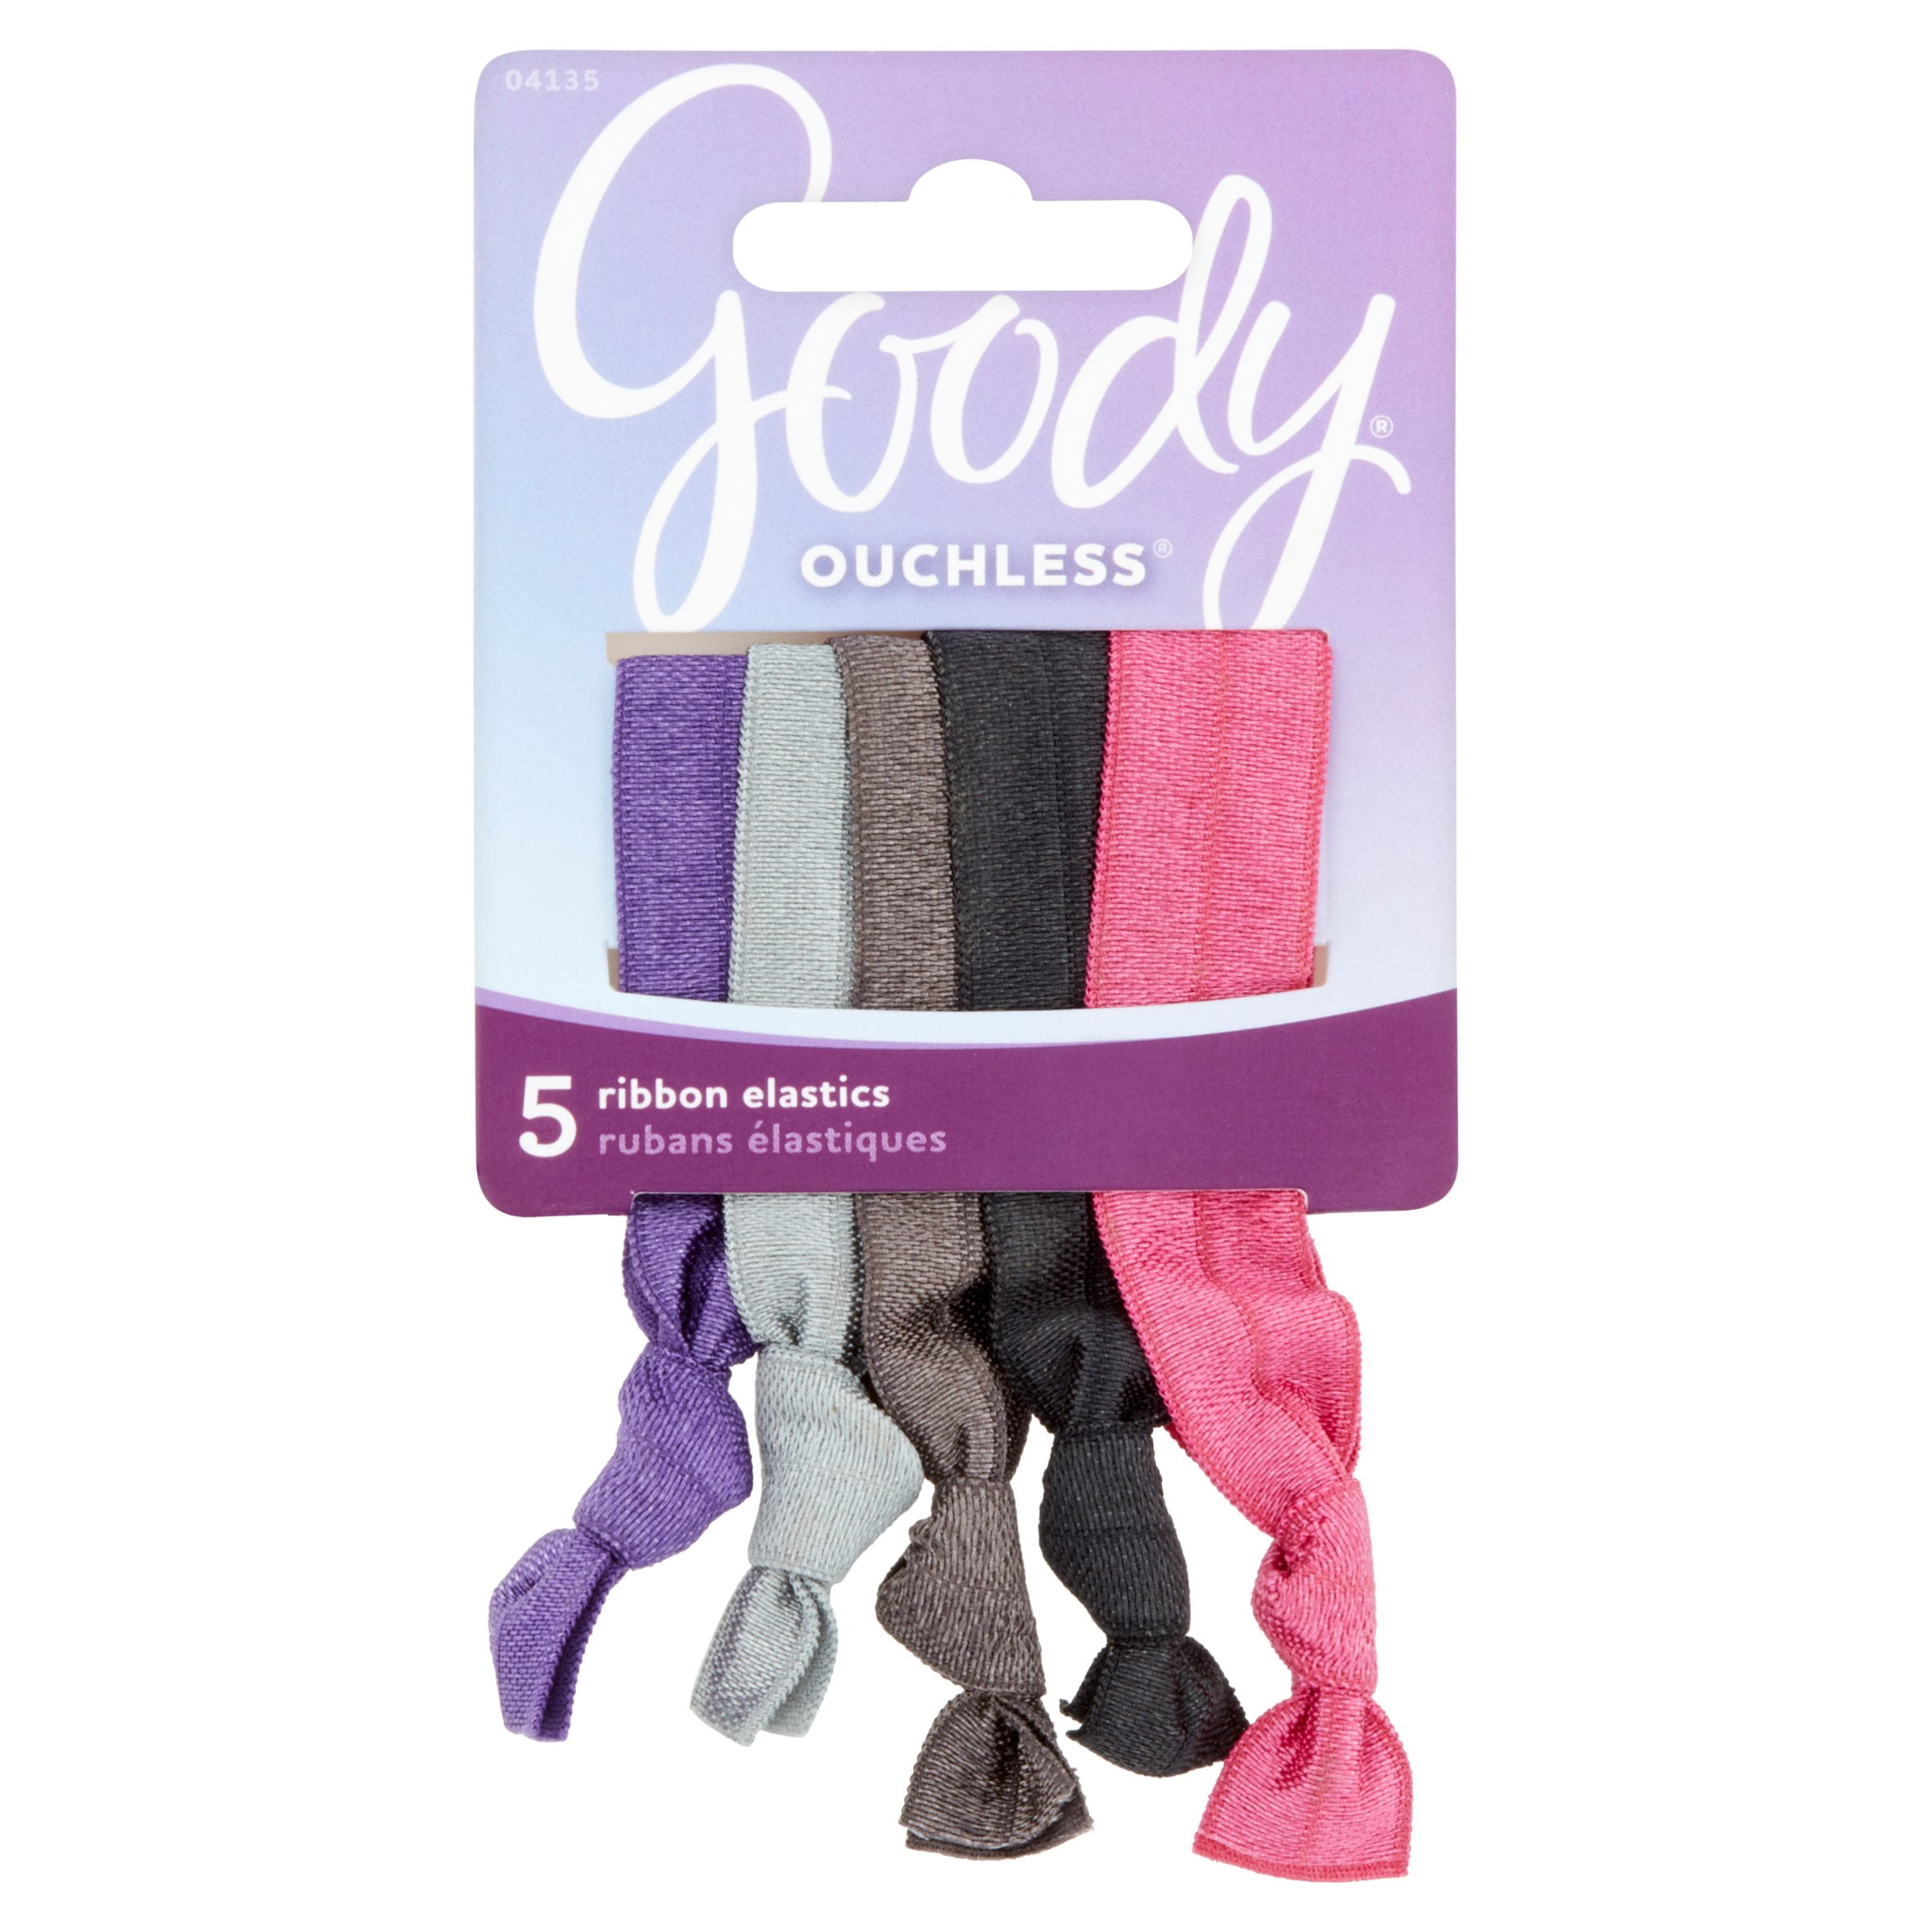 Goody Ouchless Ribbon Elastic Ponytail Holders 5 Pack Black & Bobby Pins 07826 